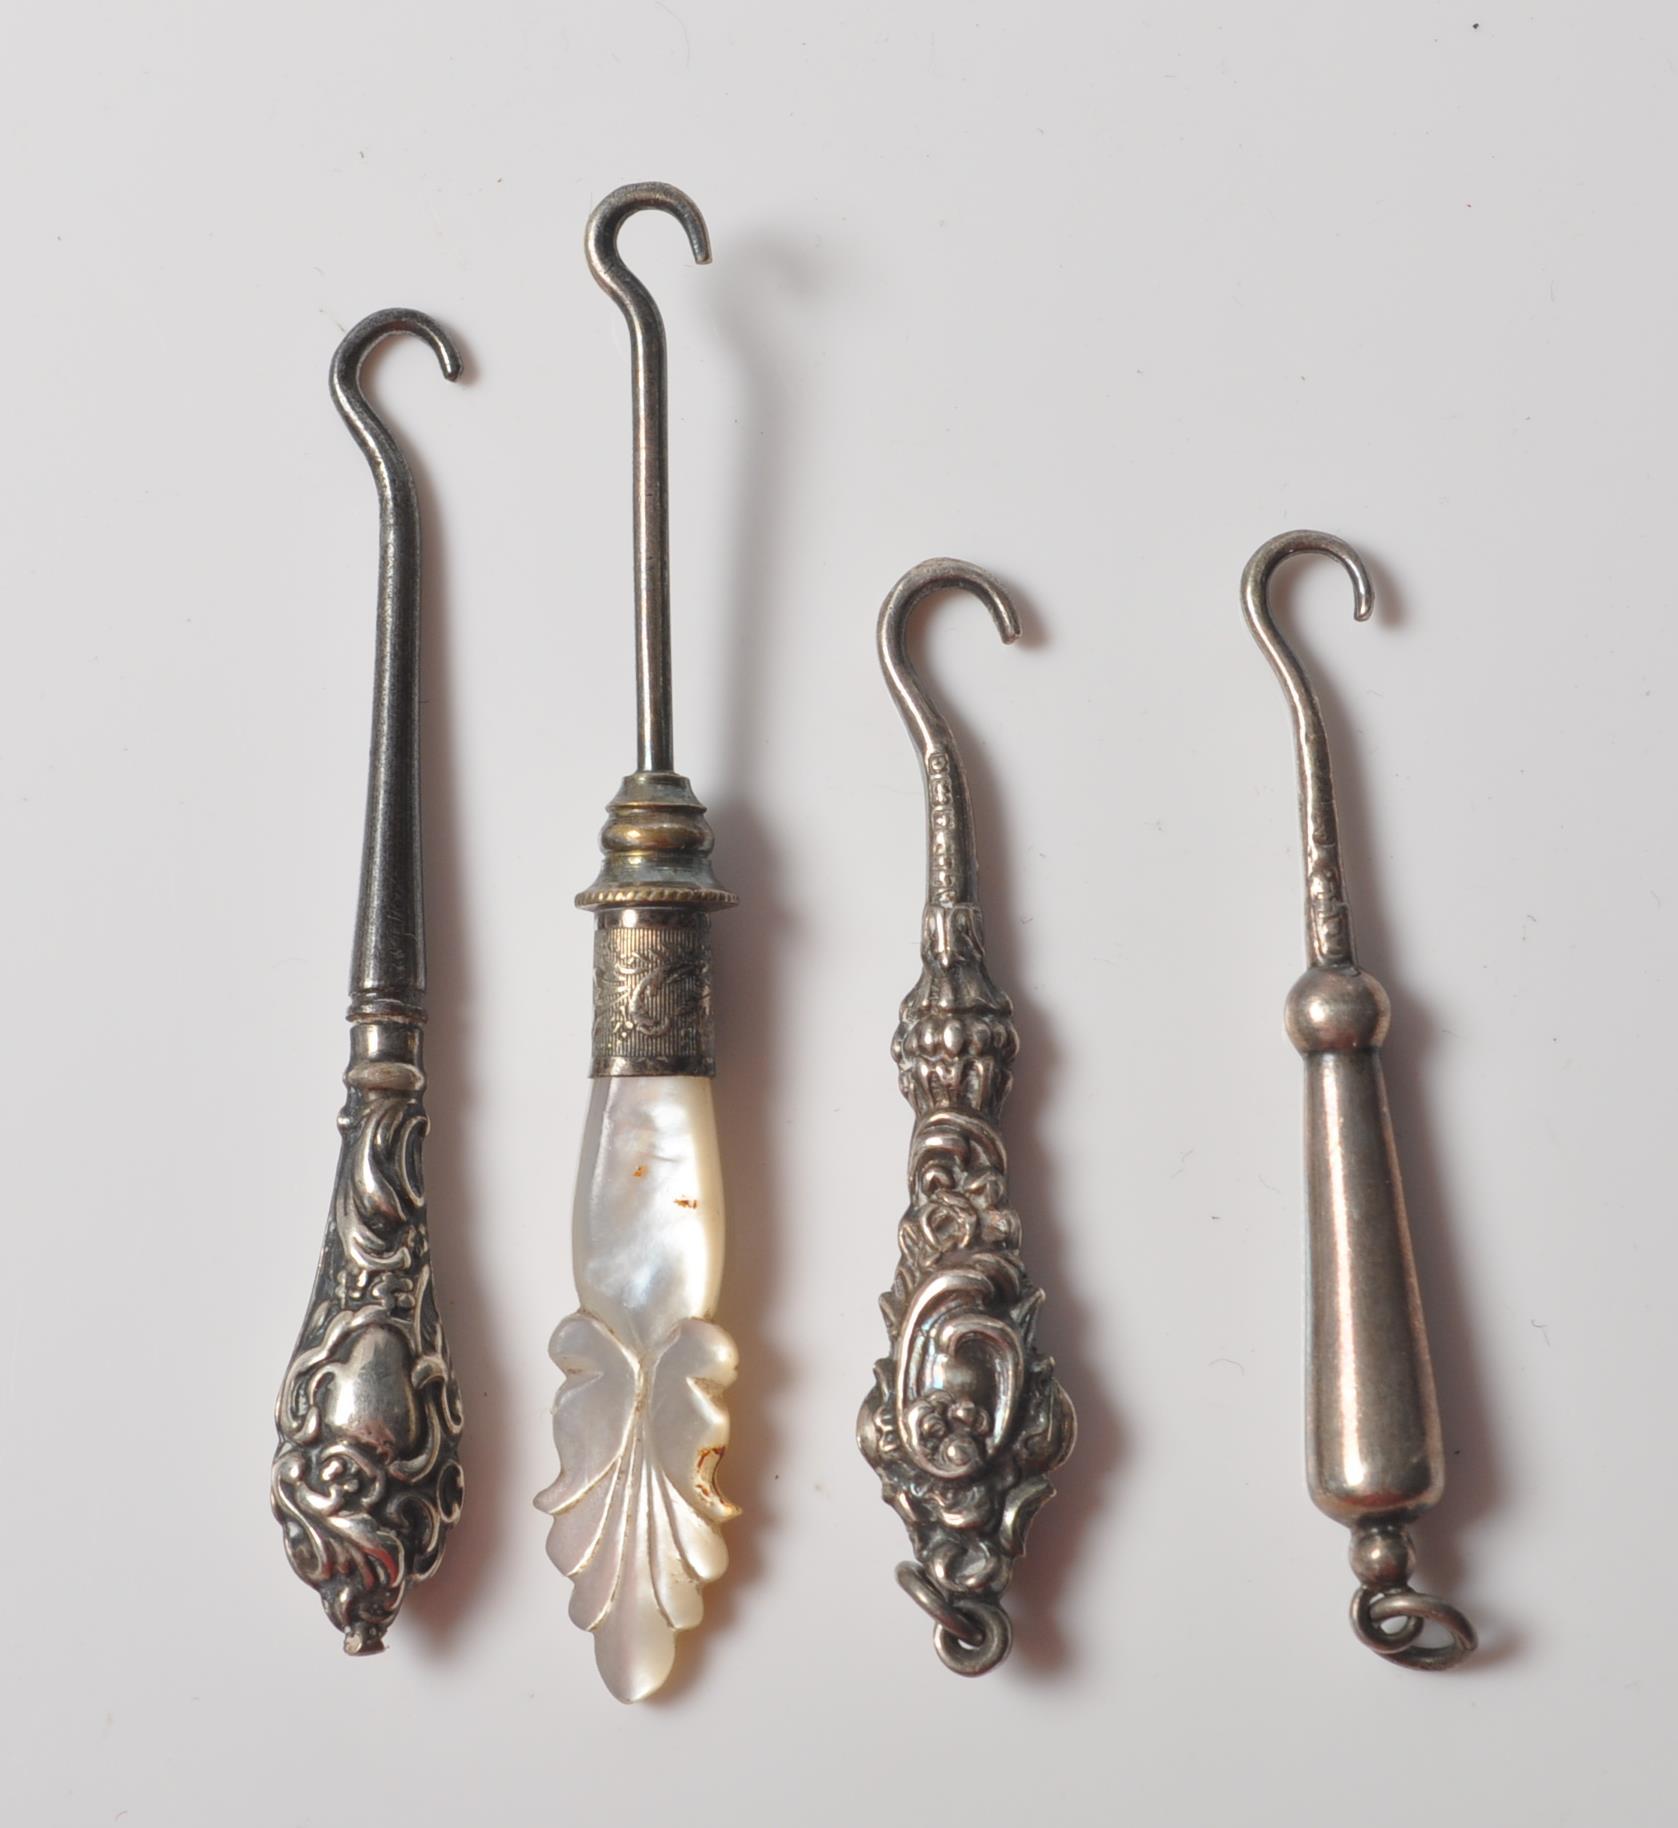 COLLECTION OF FOUR VICTORIAN SILVER BUTTON HOOKS WITH AGATE AND MOTHER OF PEARL HANDLES. - Image 6 of 8